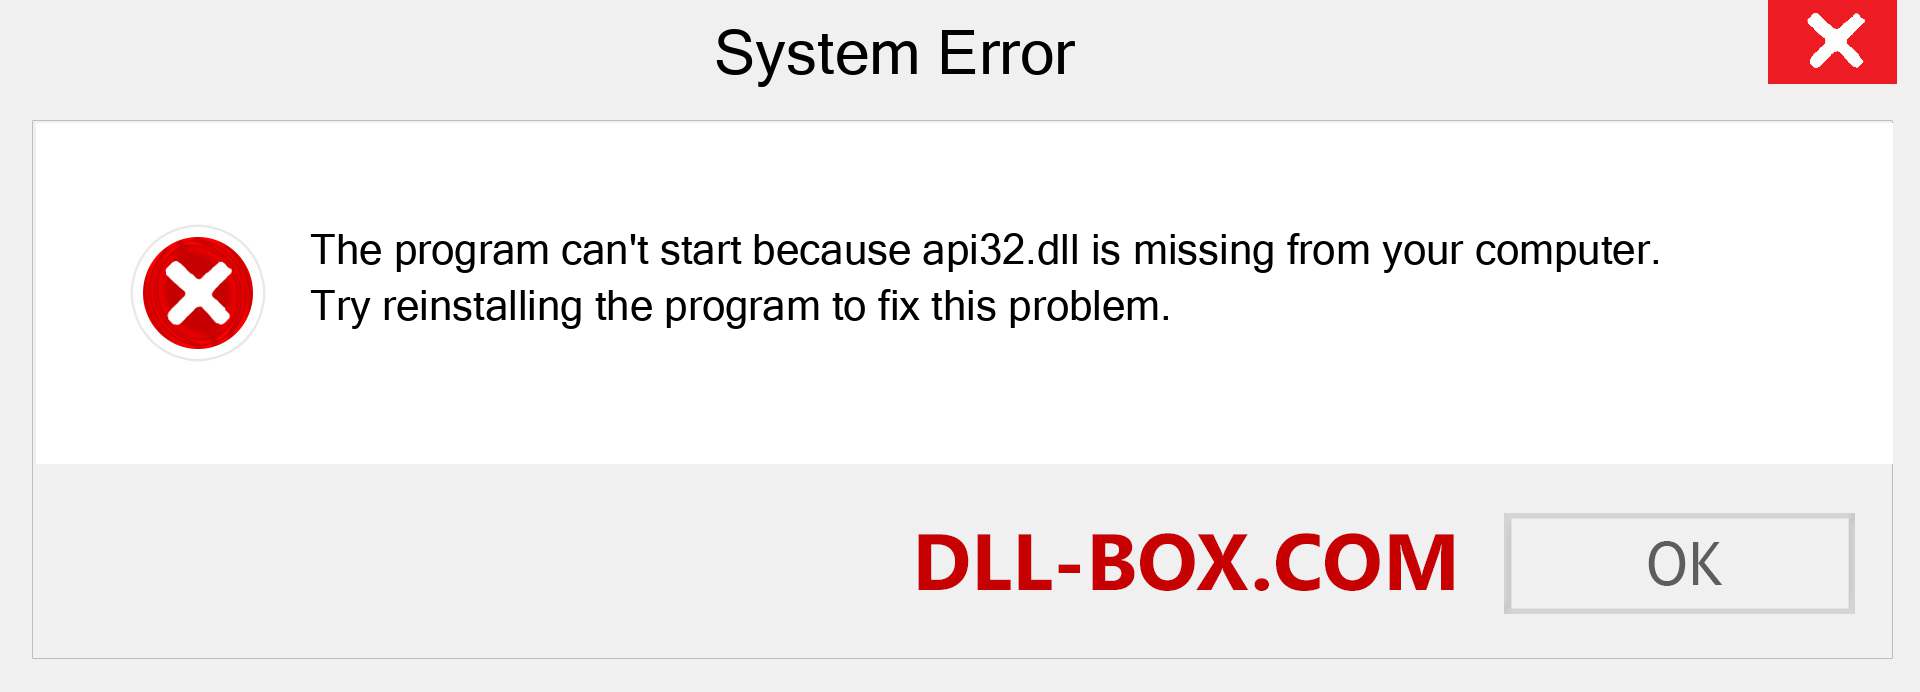  api32.dll file is missing?. Download for Windows 7, 8, 10 - Fix  api32 dll Missing Error on Windows, photos, images